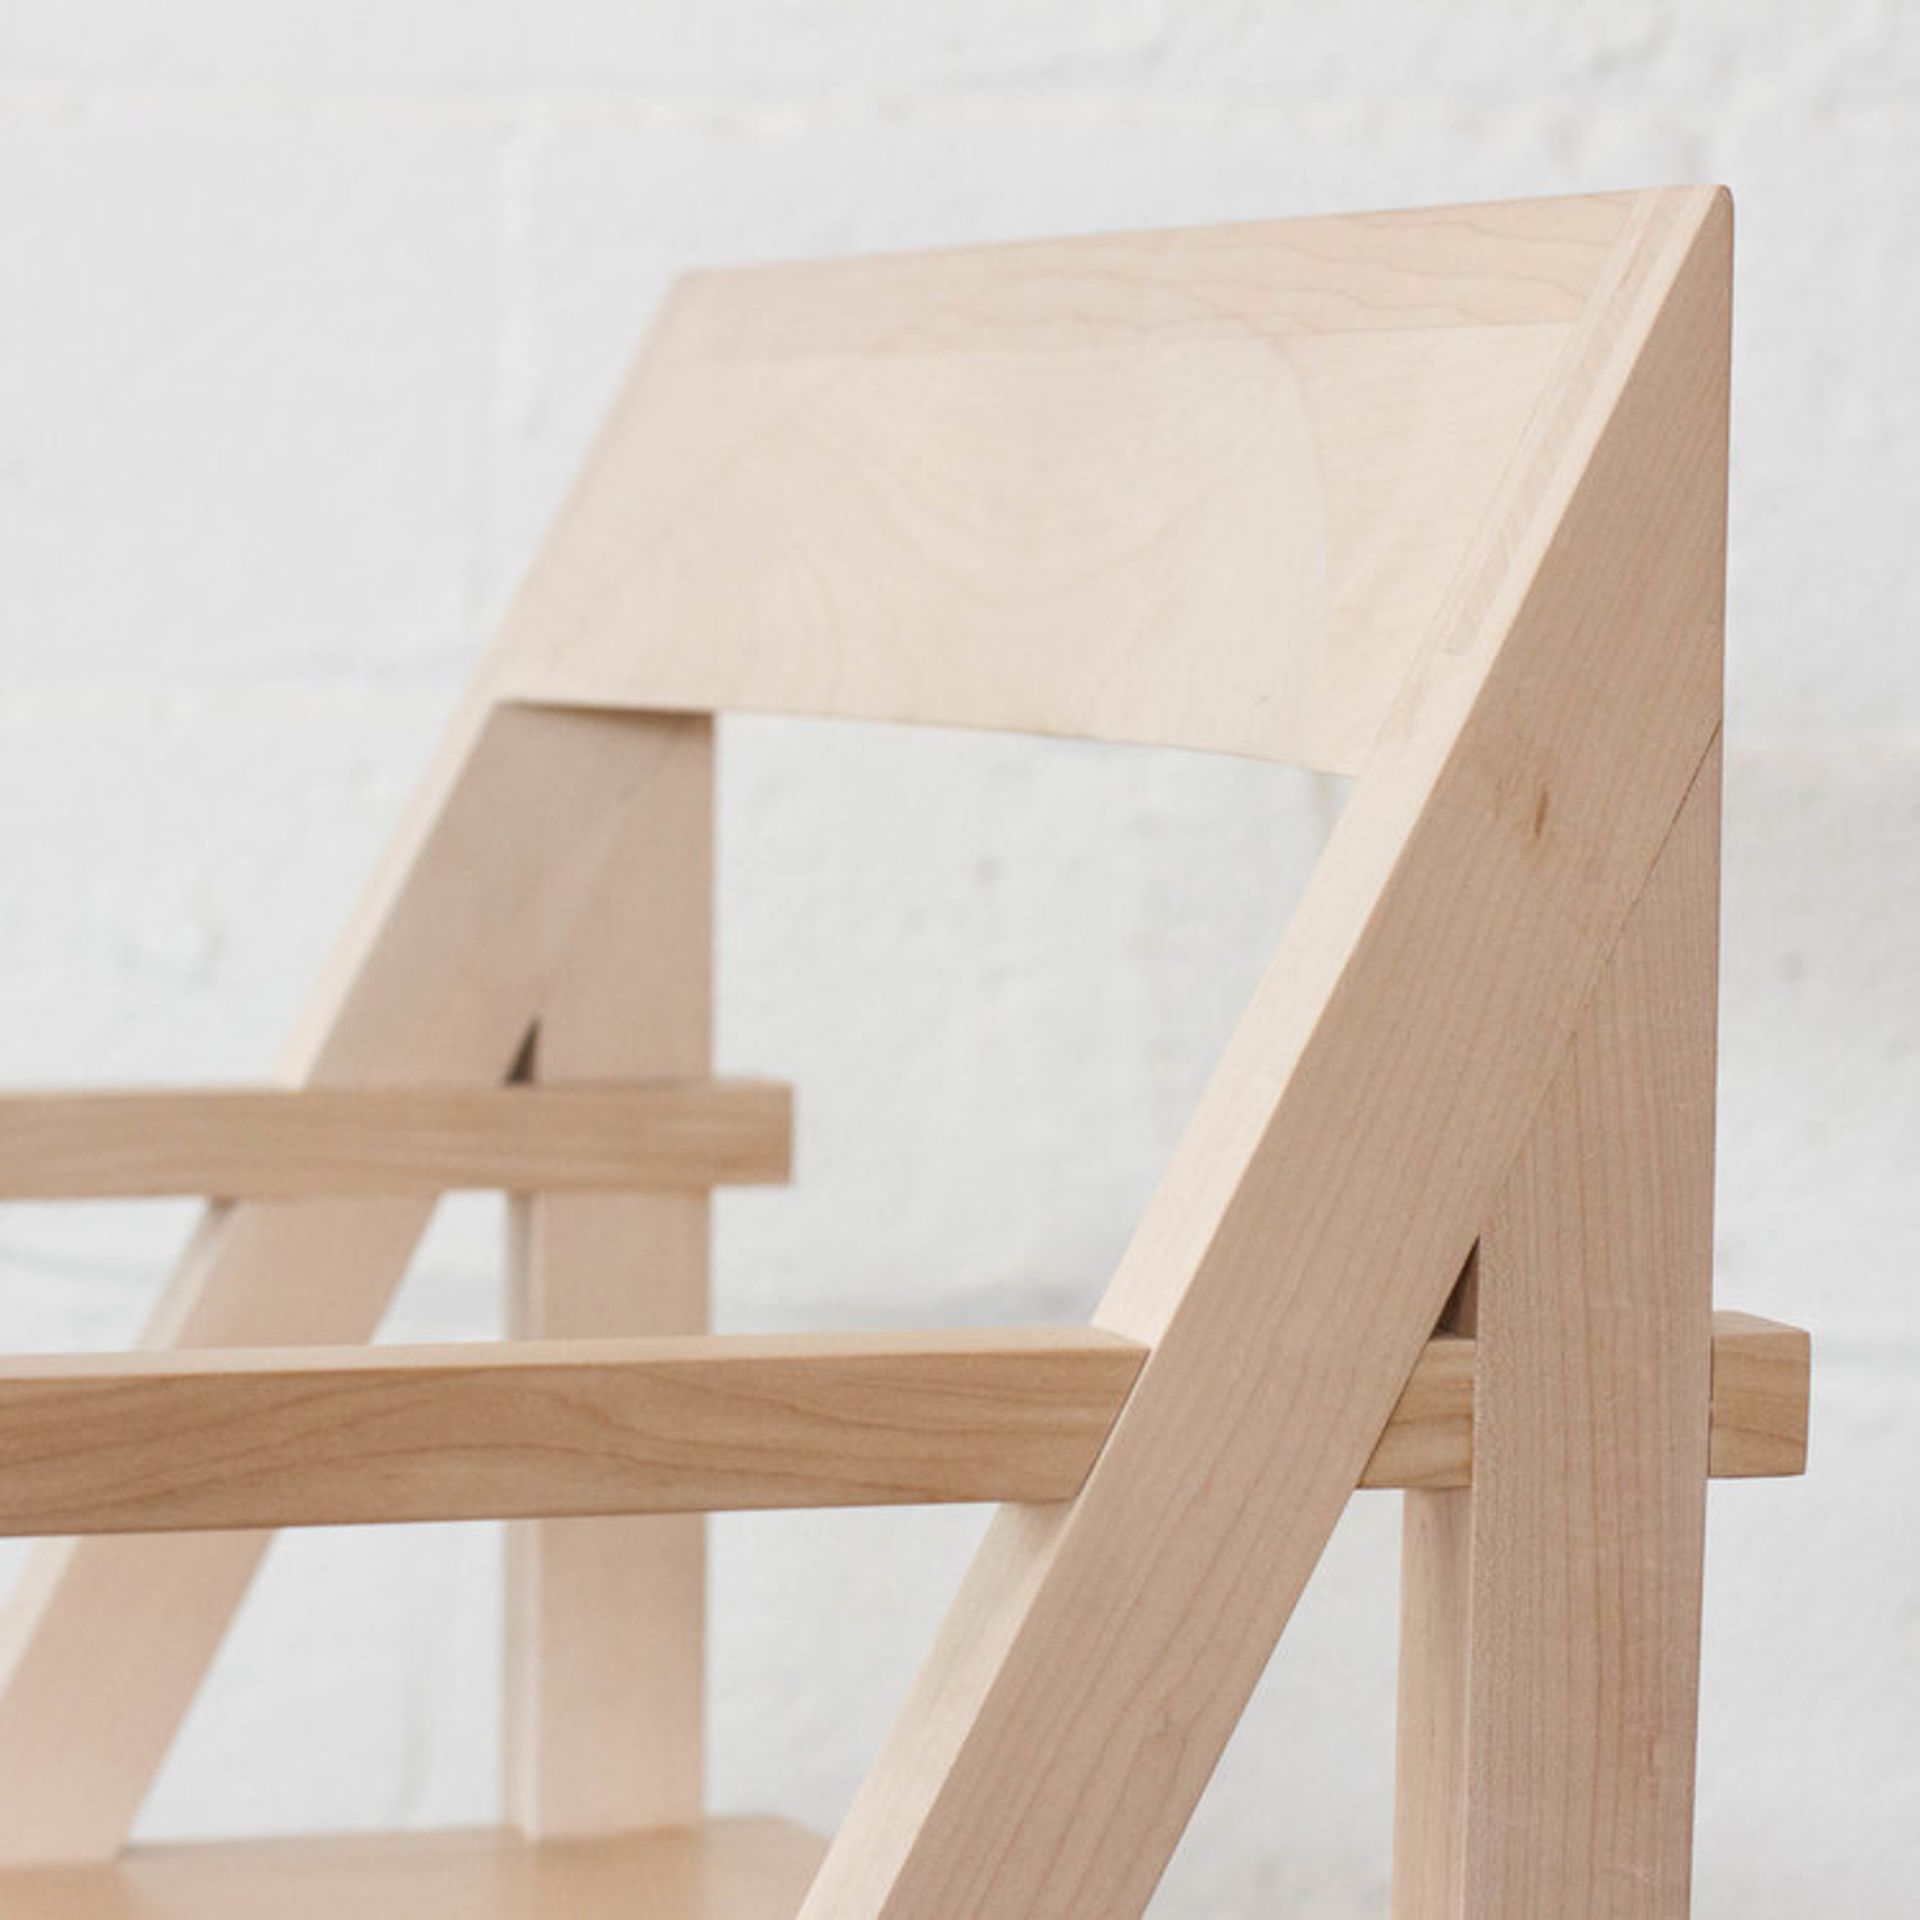 Cantilever Arm Chair